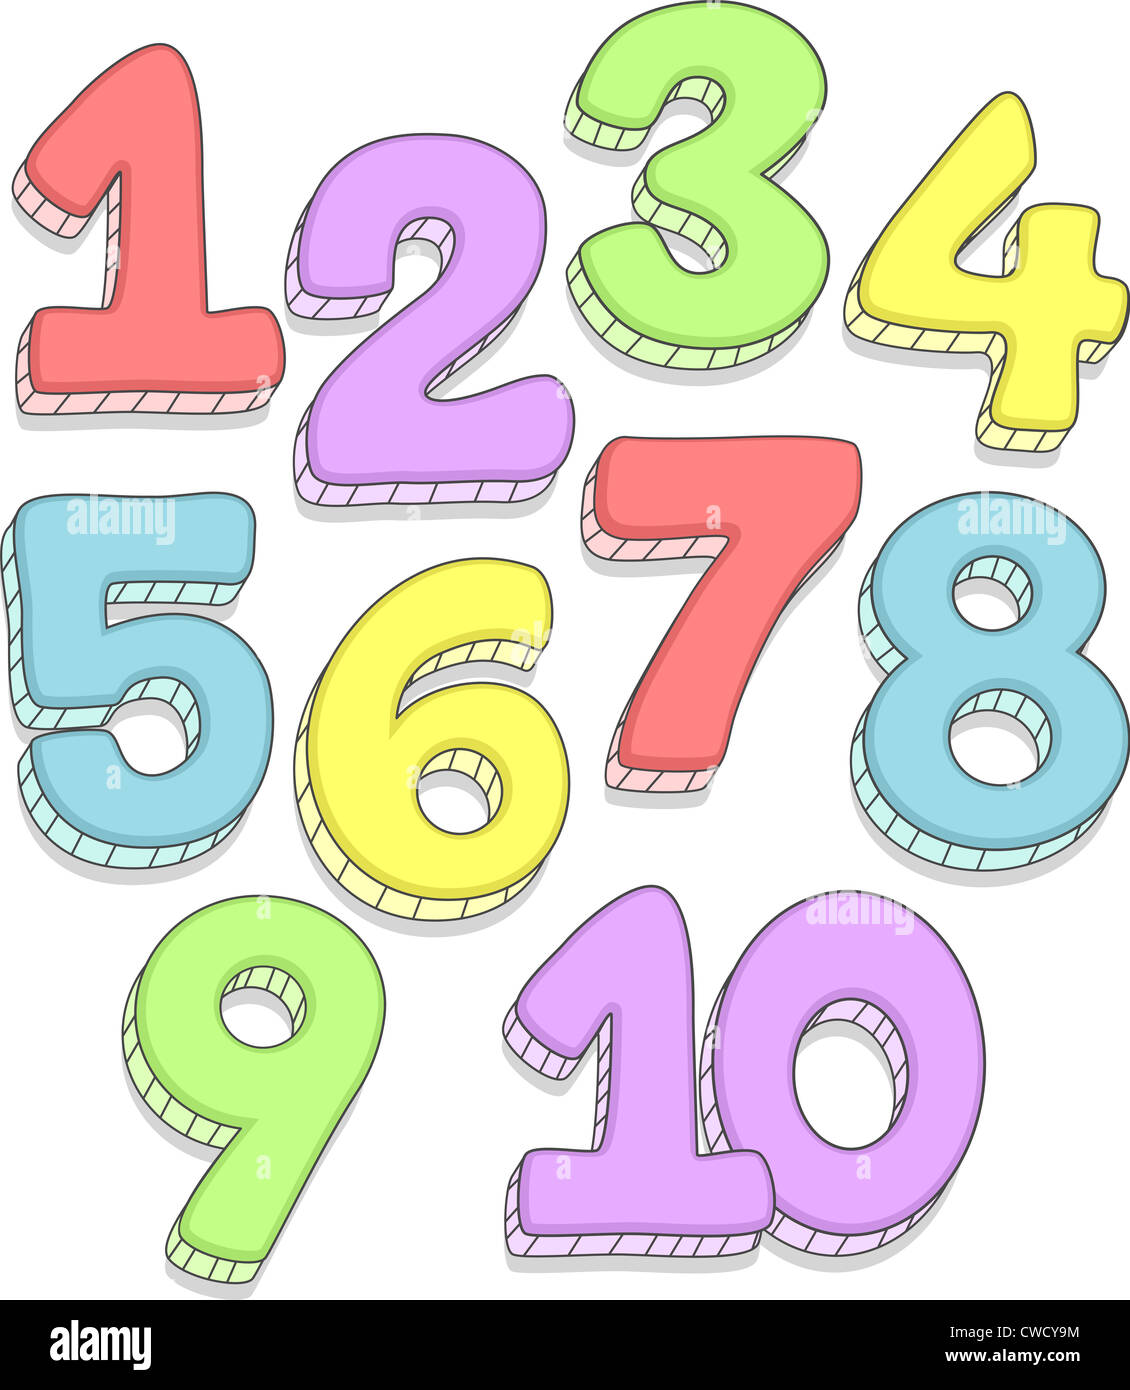 Doodle Illustration Featuring the Numbers 1-10 Stock Photo